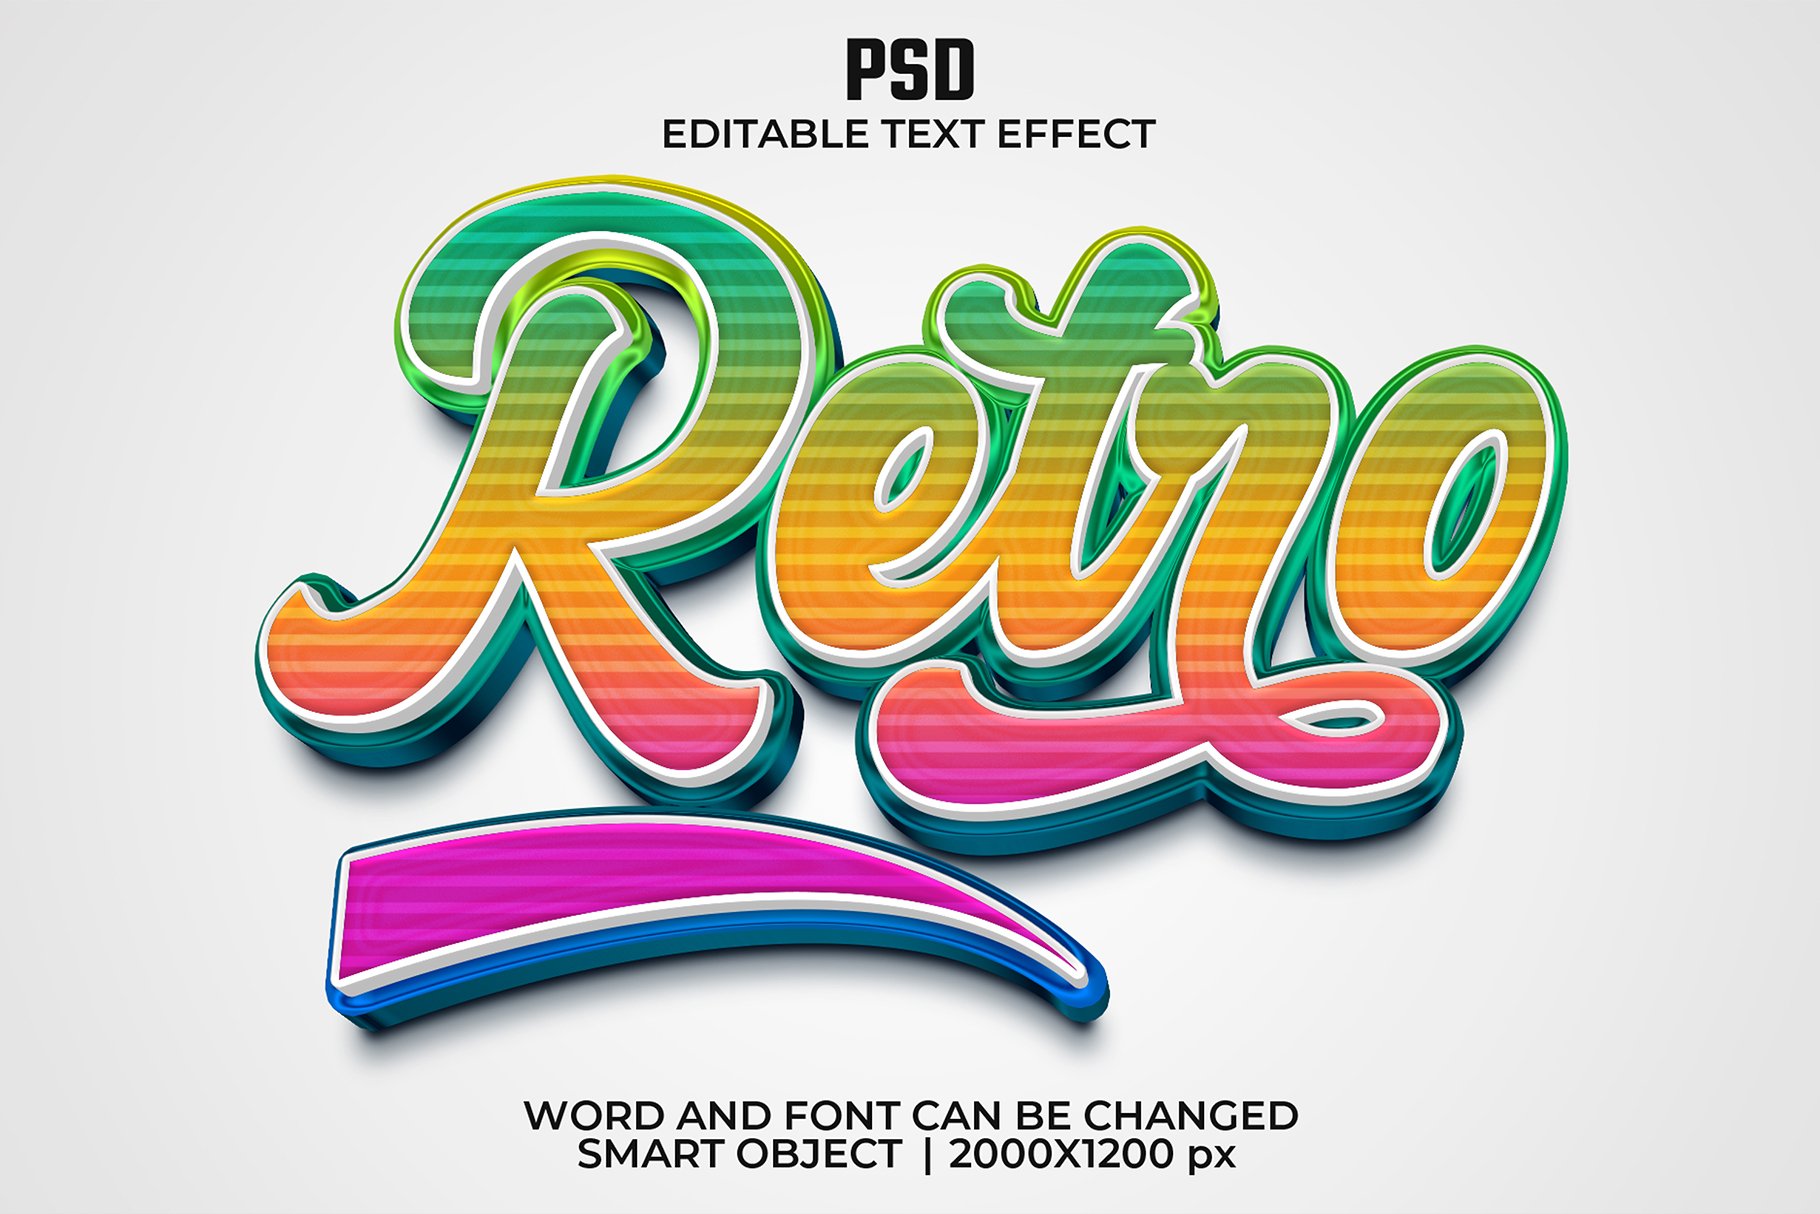 Retro 3d Editable Text Effect Stylecover image.